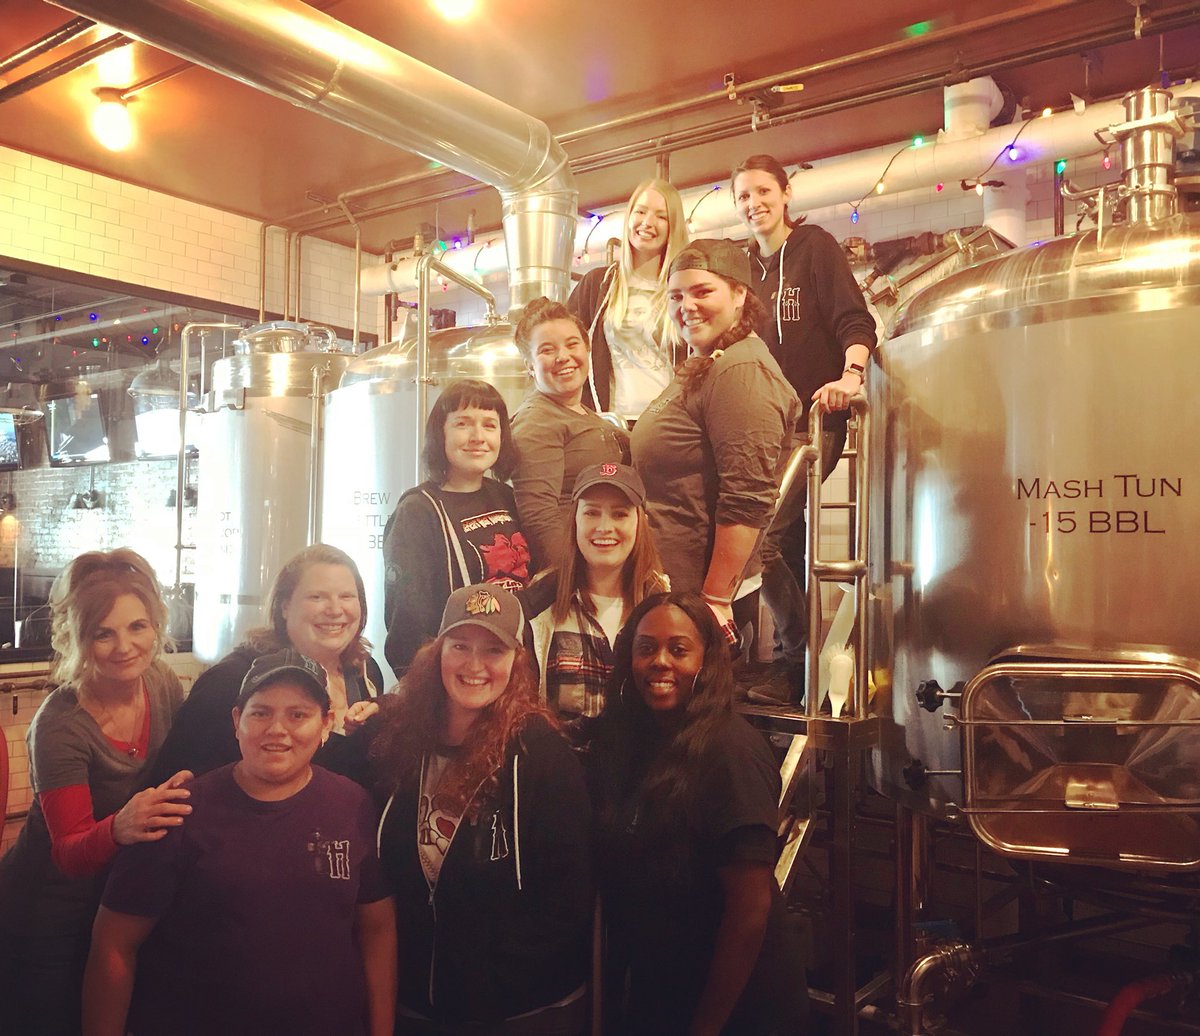 Happy International Women’s Day! Looking forward to our (yet unnamed) Belgian Golden Strong Ale! #IWCBD #internationalwomensday #women #craftbeer #womenwhobrew